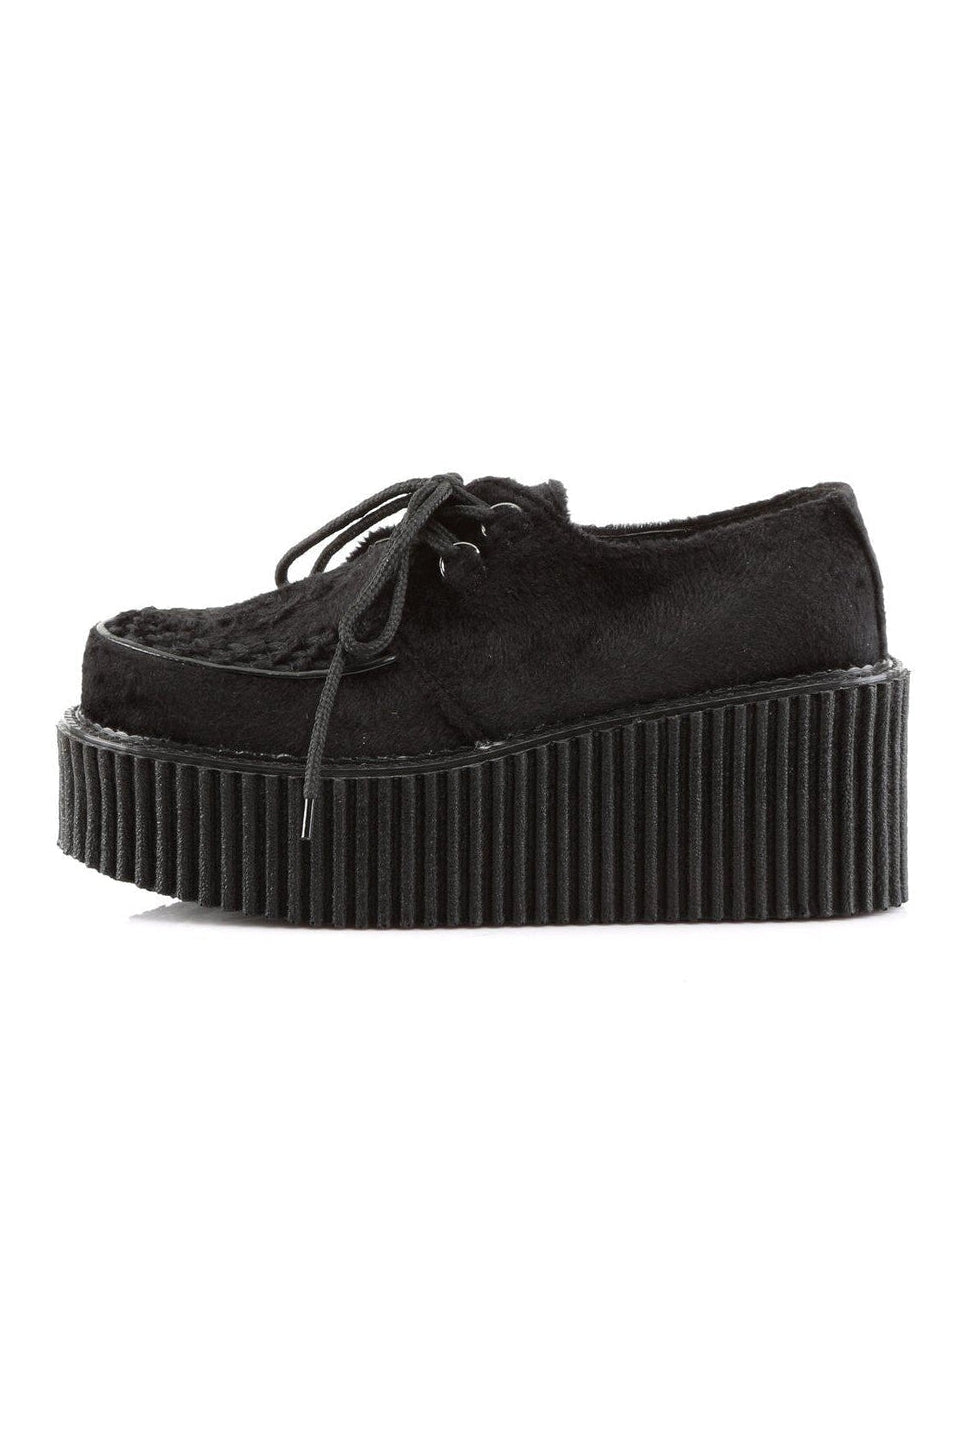 CREEPER-202 Creepers | Black Faux Leather-Creepers-Demonia-SEXYSHOES.COM